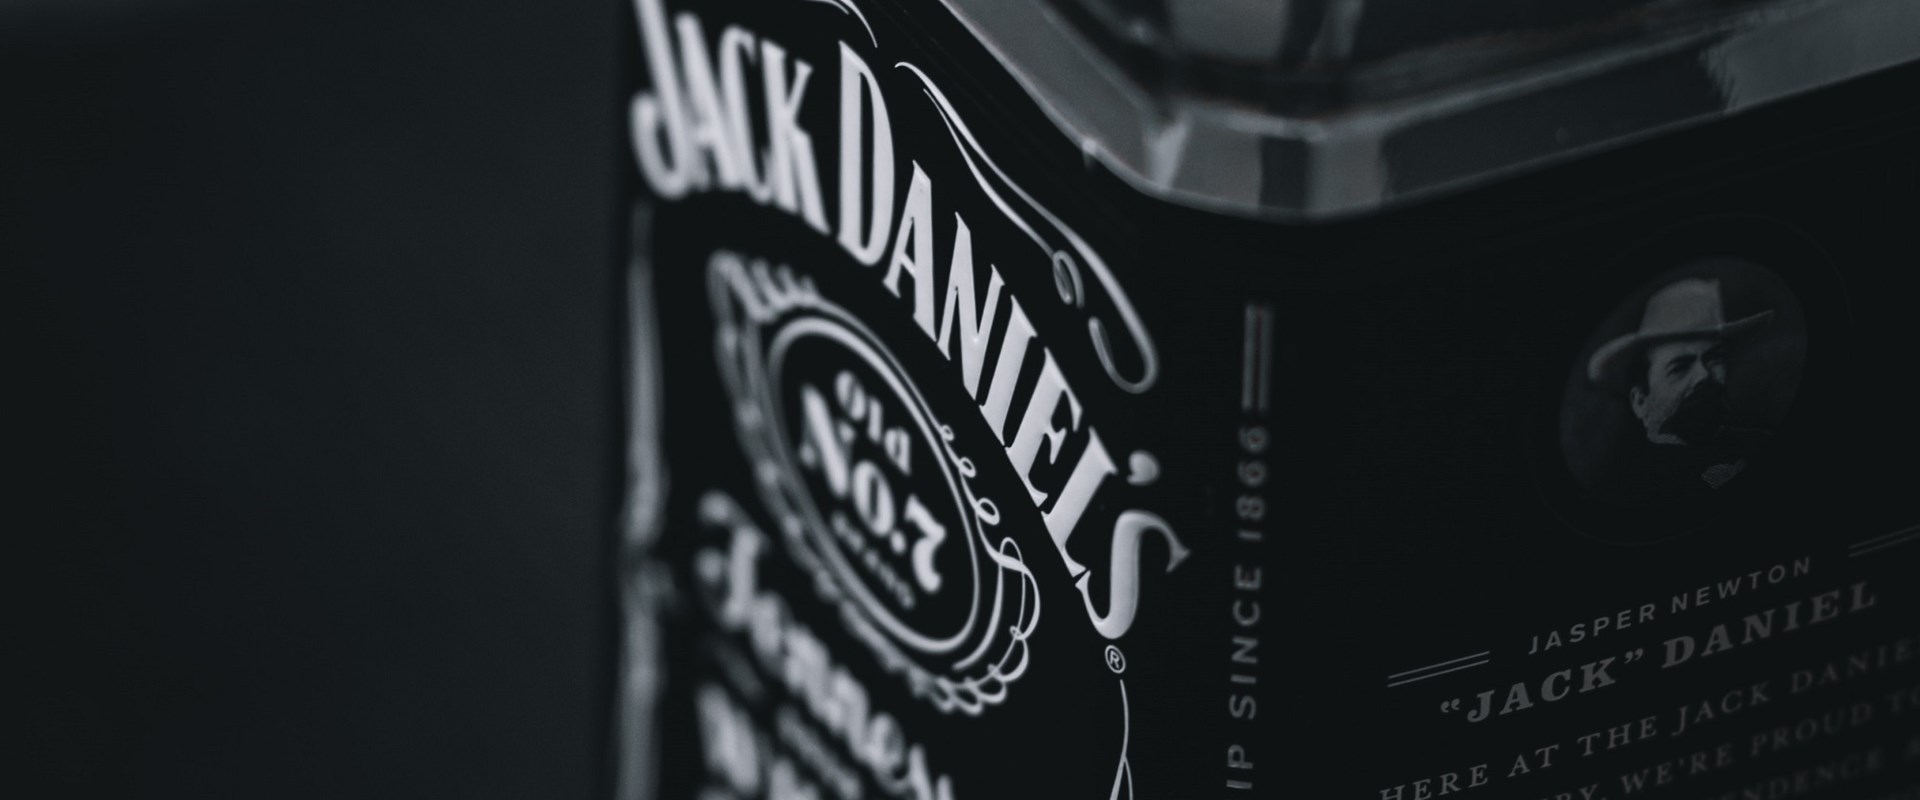 Supreme Court sides with Jack Daniel's in trademark dispute with